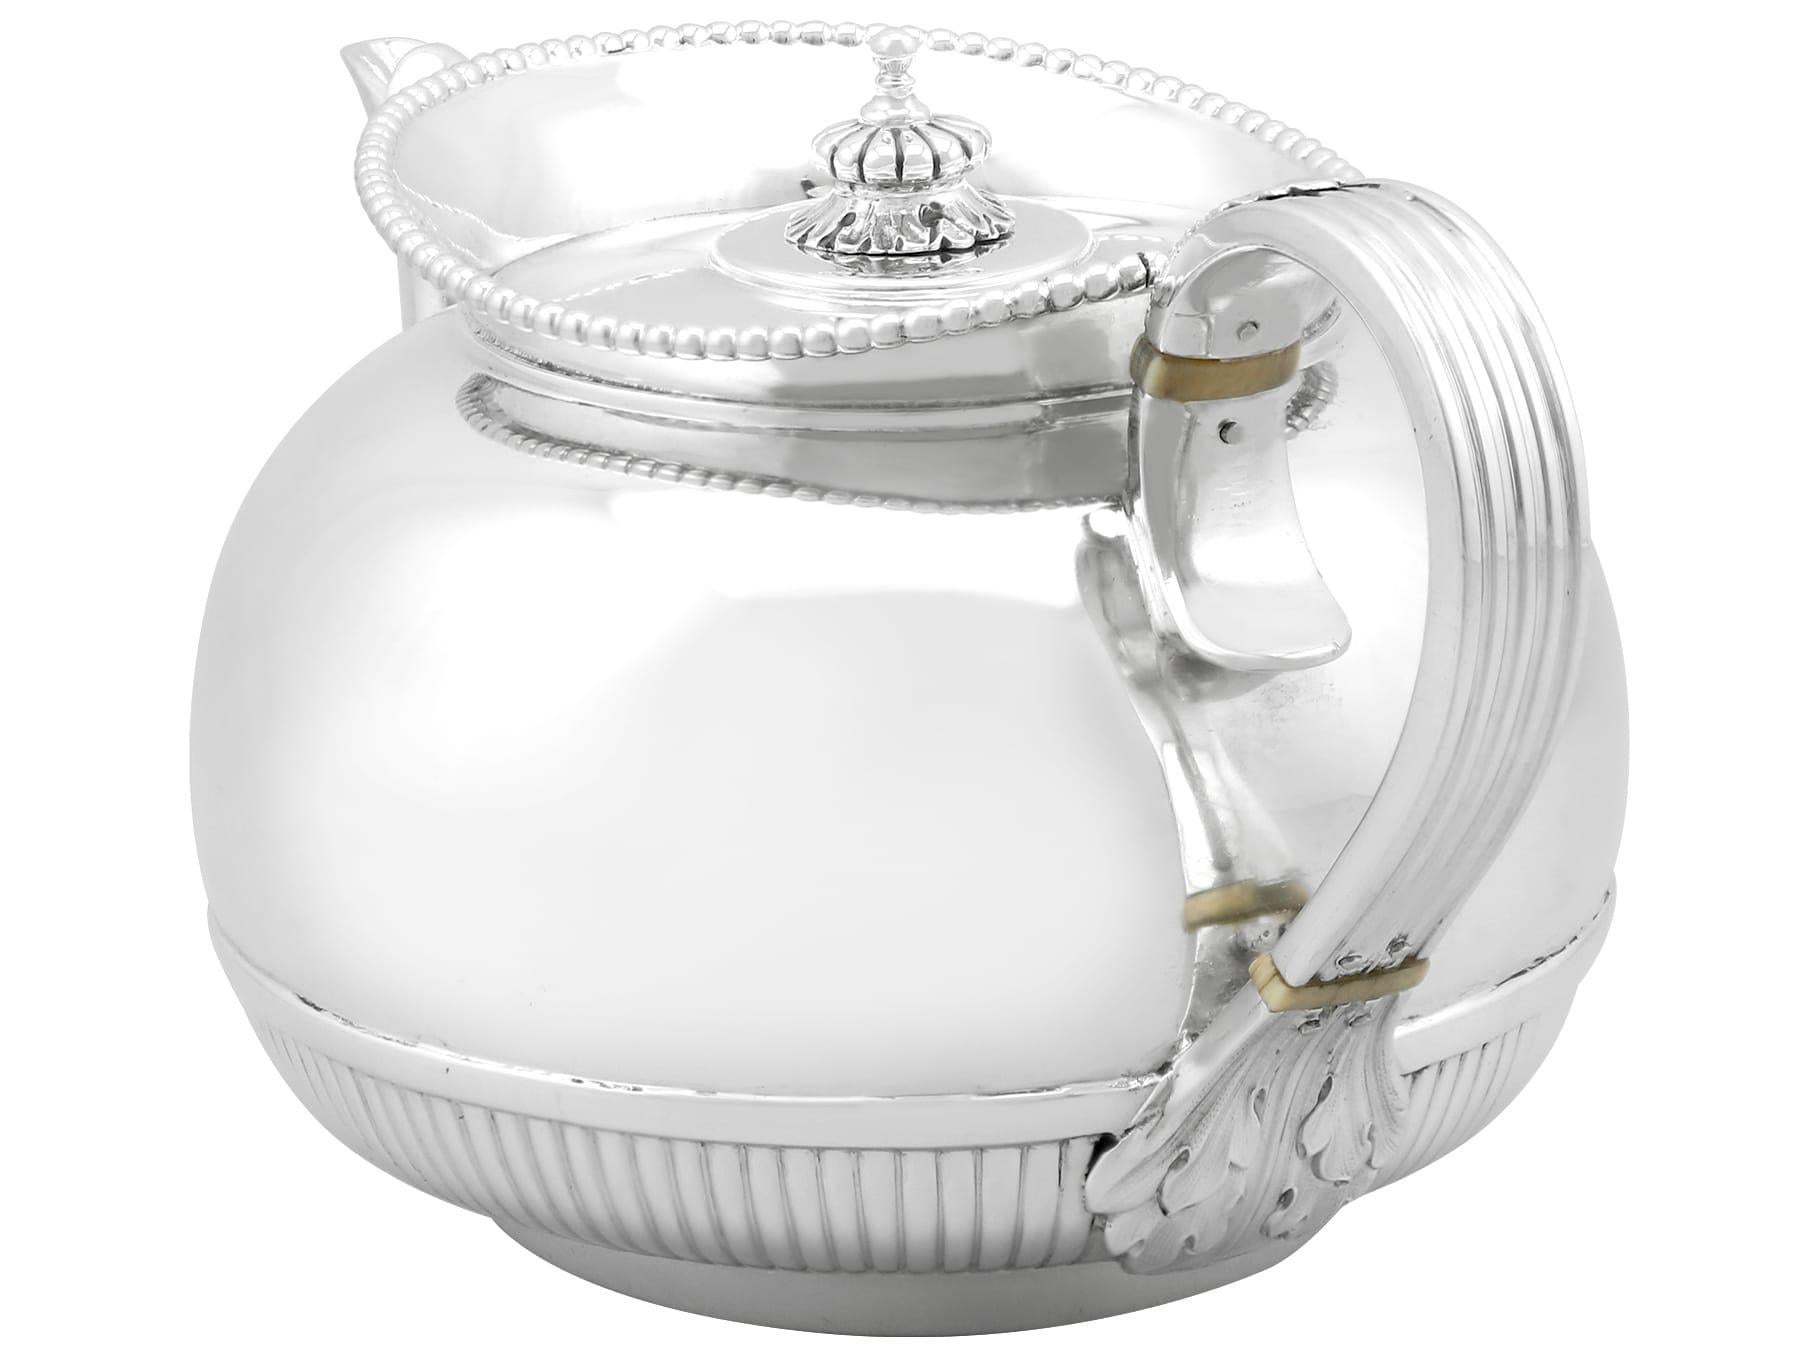 An exceptional, fine and impressive antique Victorian English sterling silver bachelor teapot; an addition to our silver teaware collection.

This exceptional antique Victorian teapot, in sterling standard silver, has a circular rounded form.

The